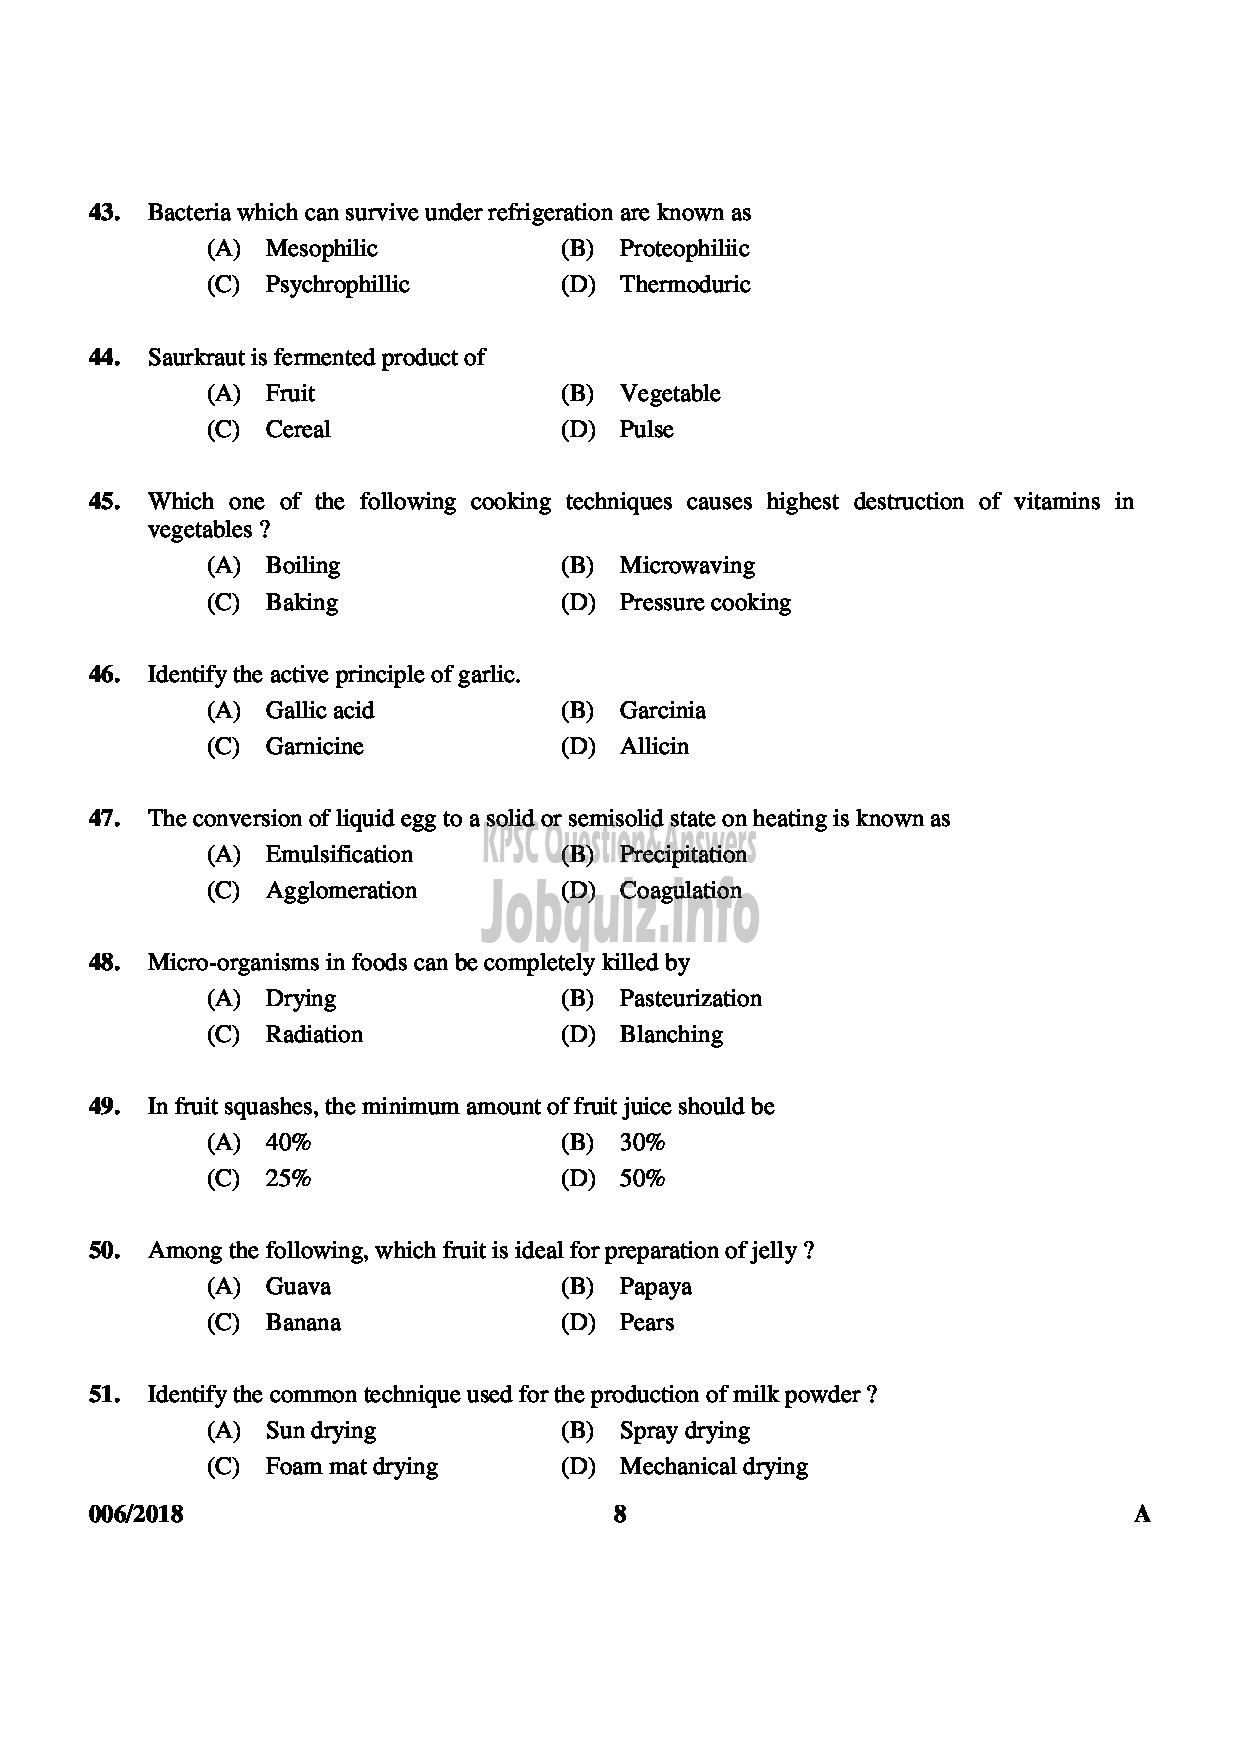 Kerala PSC Question Paper - TECHNICAL ASSISTANT GR II GOVERNMENT ANALYSTS LABORATORY FOOD SAFETY DEPT QUESTION PAPER-8